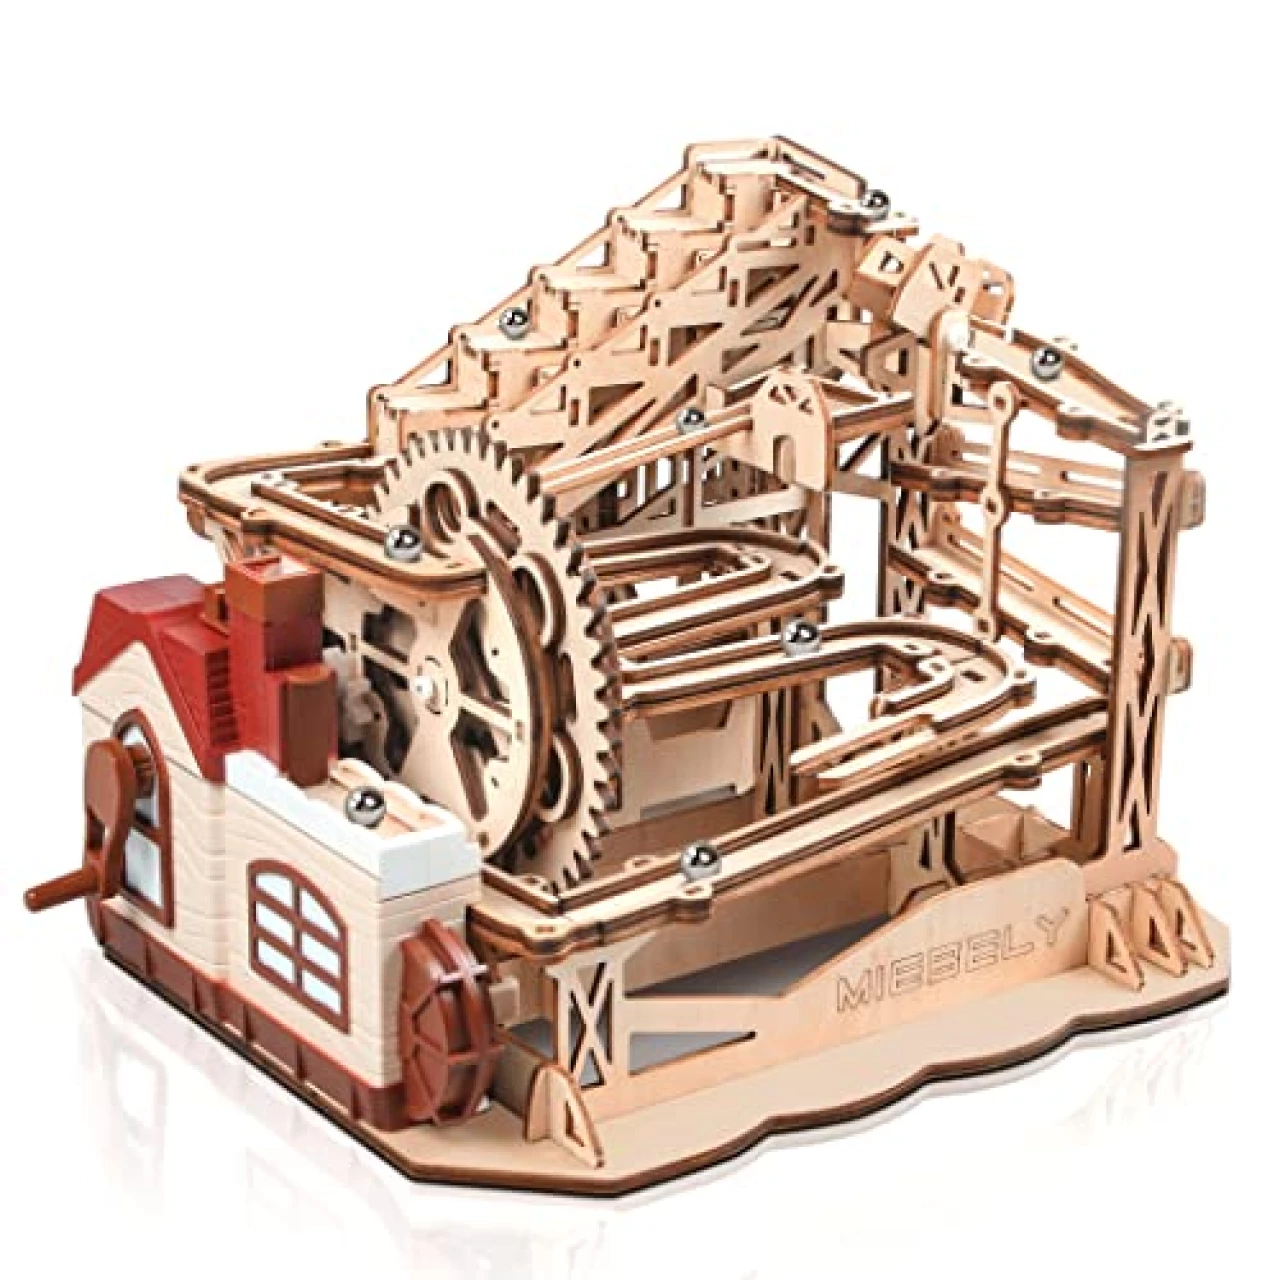 MIEBELY Electrical 3D Wooden Puzzles Adults Craft Toys DIY Marble Run Model Building Kits